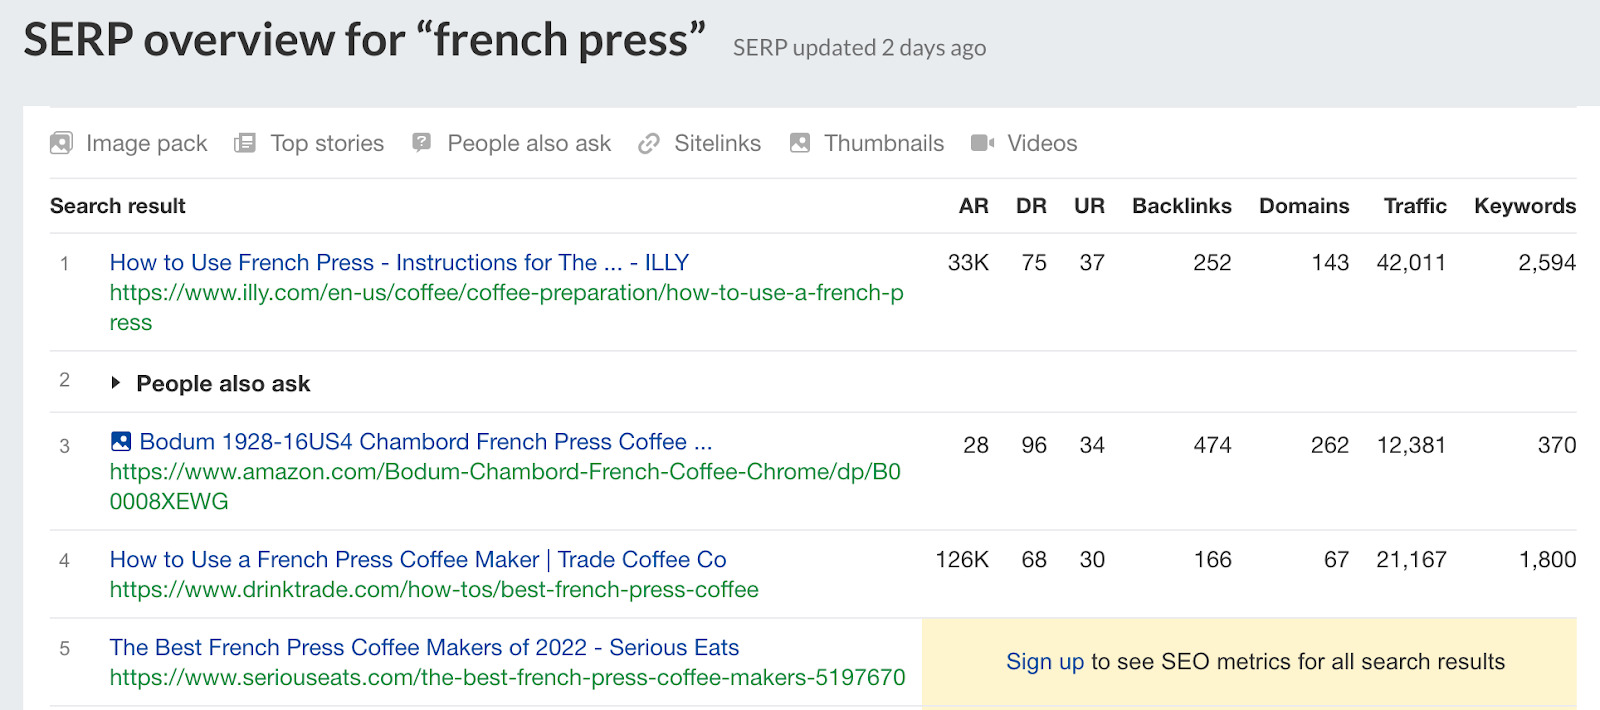 SERP overview for "french press"